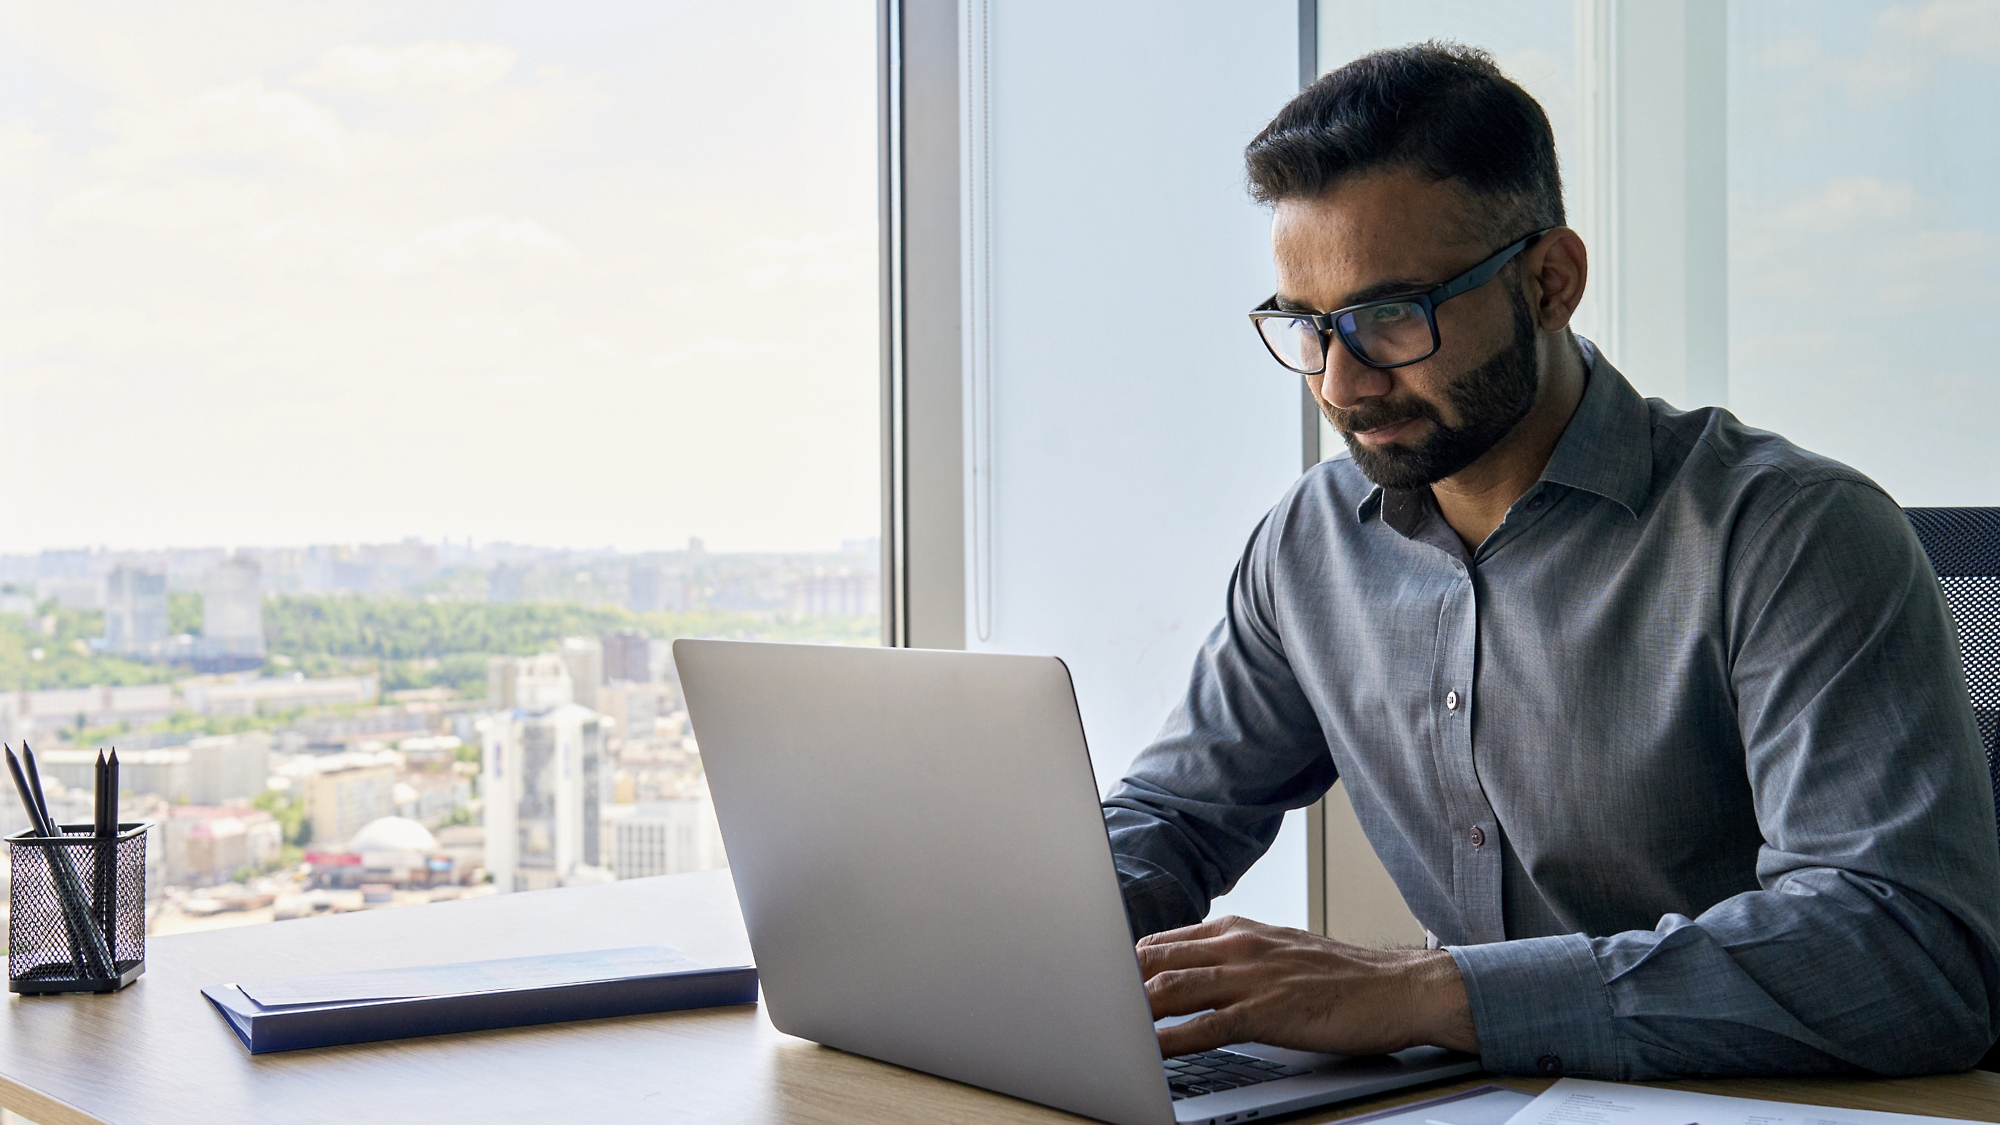 A man wearing glasses works intently on a laptop at a desk by a window overlooking a cityscape.